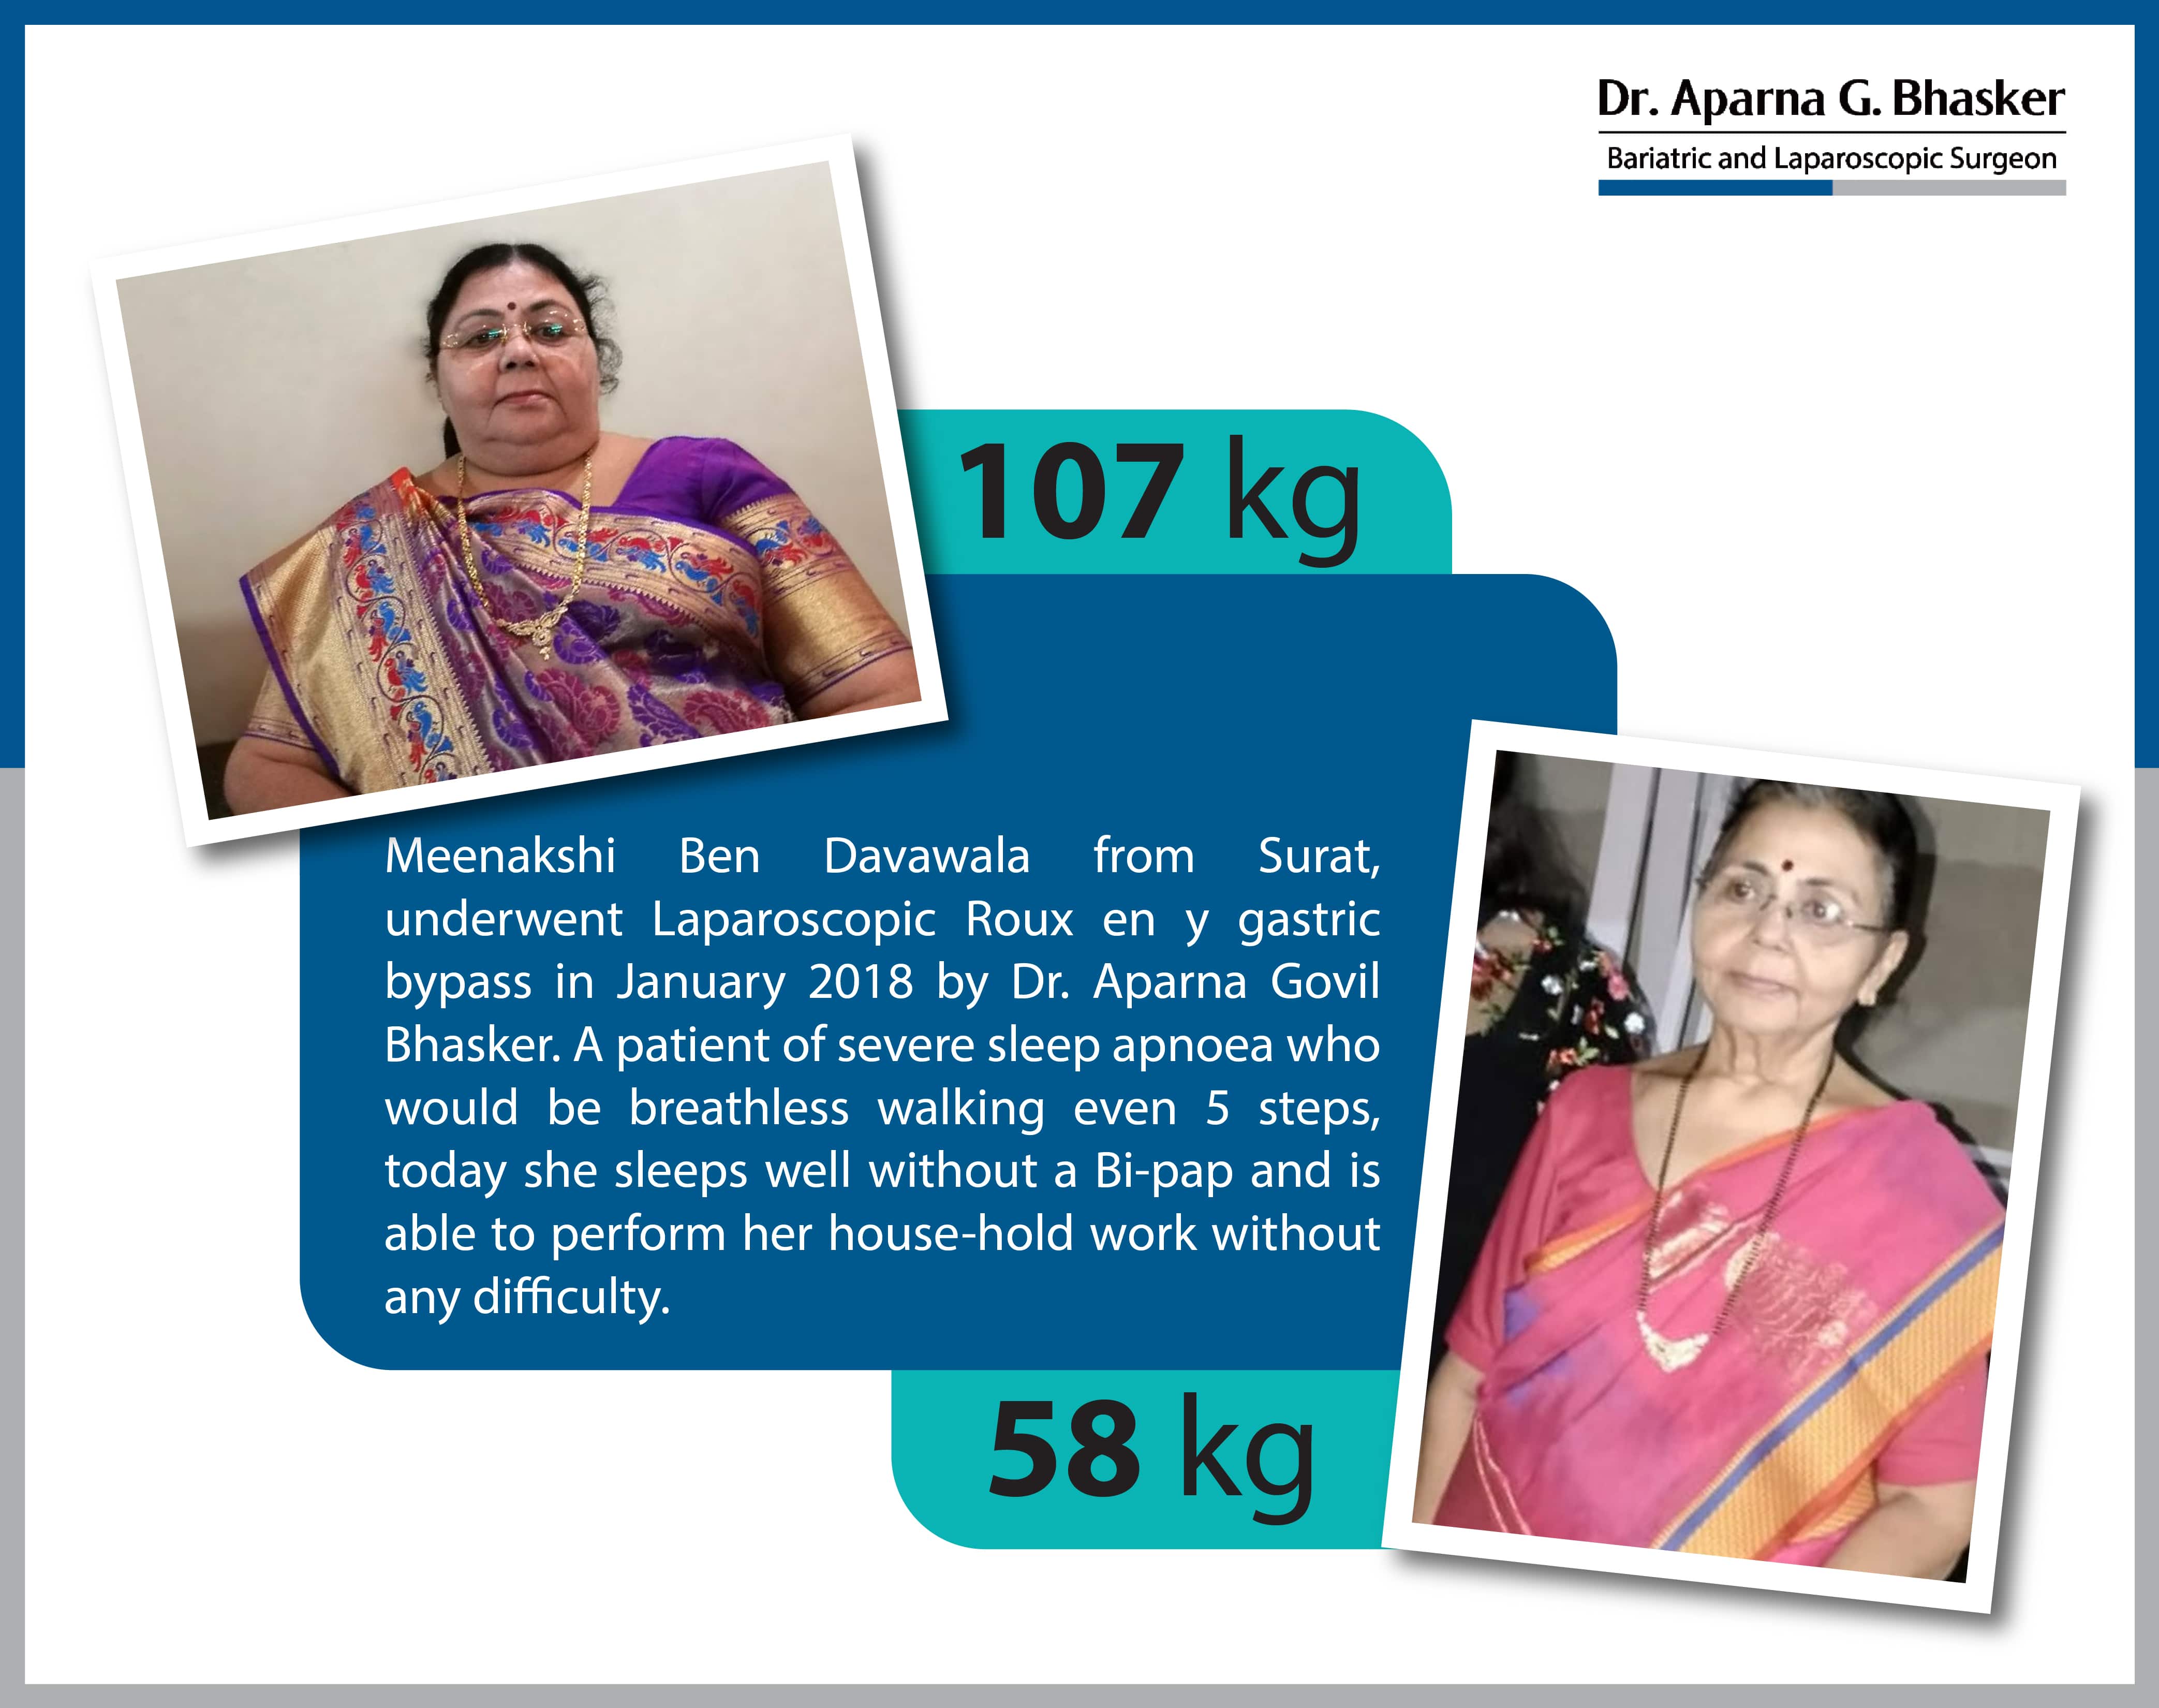 best Single Incision Sleeve Gastrectomy bariatric surgery and weight loss surgery cost in mumbai india before after photos (4)